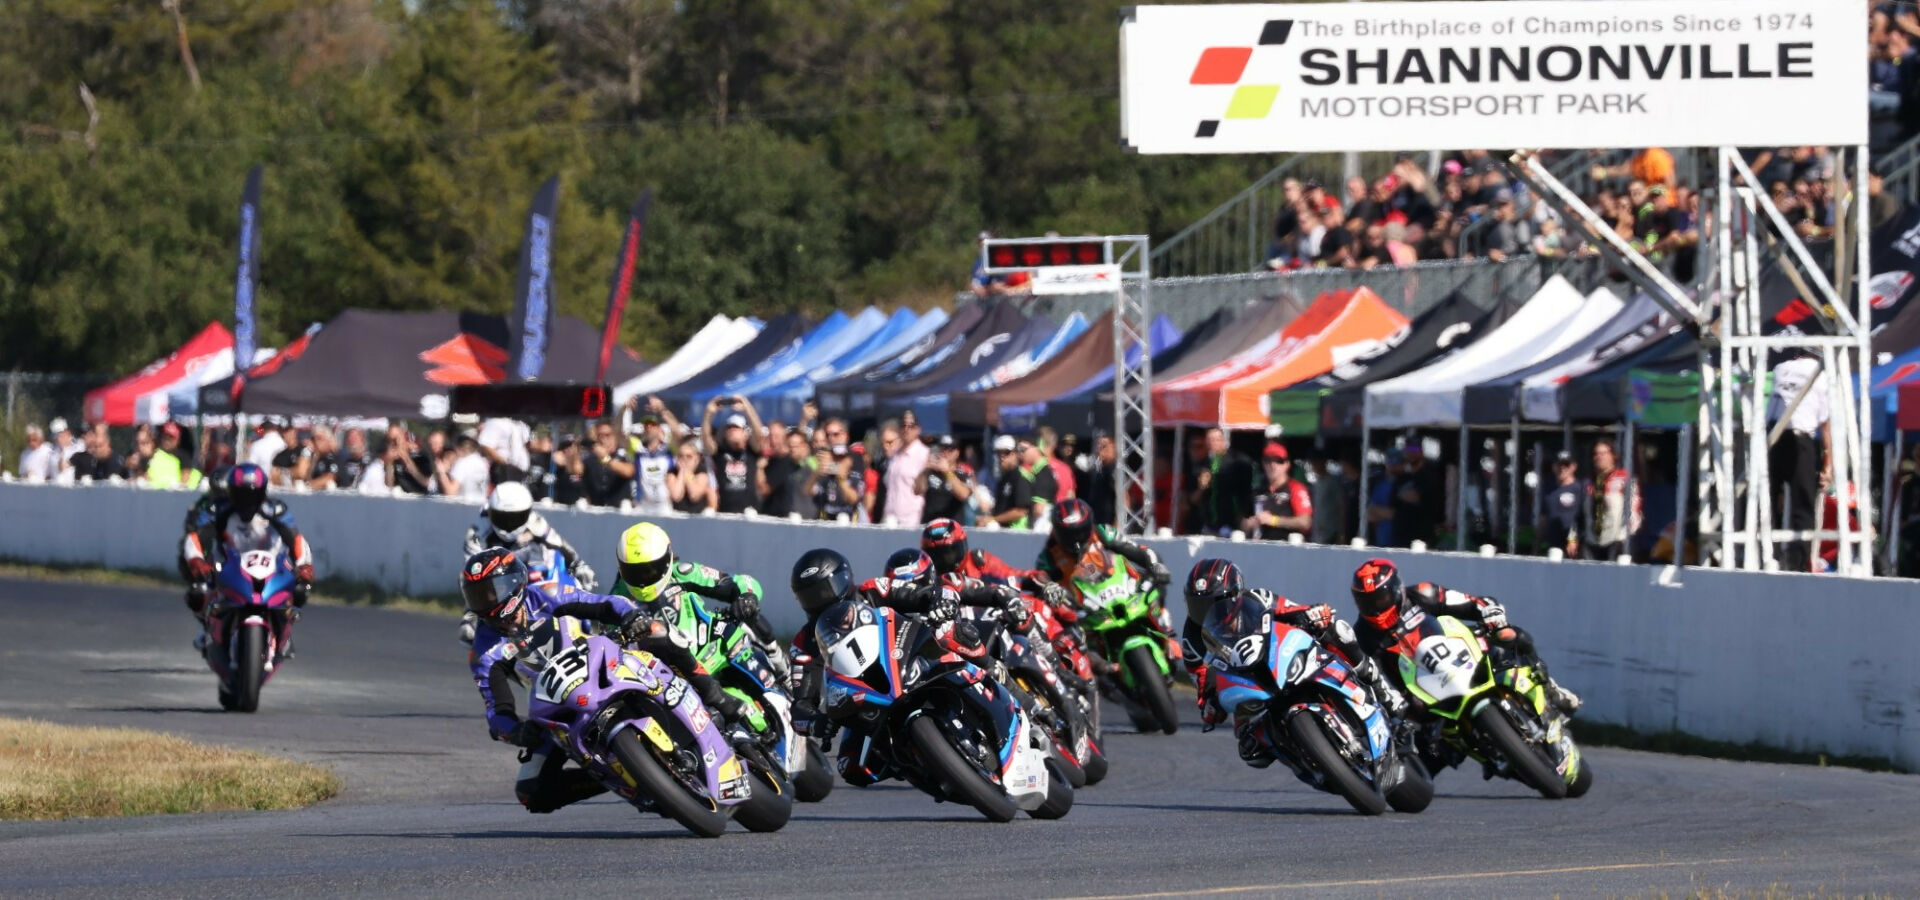 It was Alex Dumas (23) who grabbed the holeshot and led most of Saturday's Superbike race two at Shannonville Motorsport Park. Ben Young (1) took the lead on the last lap and went on to win the race, clinching the 2023 CSBK championship in the process. Trevor Dion (20) was third. Photo by Rob O'Brien, courtesy CSBK.